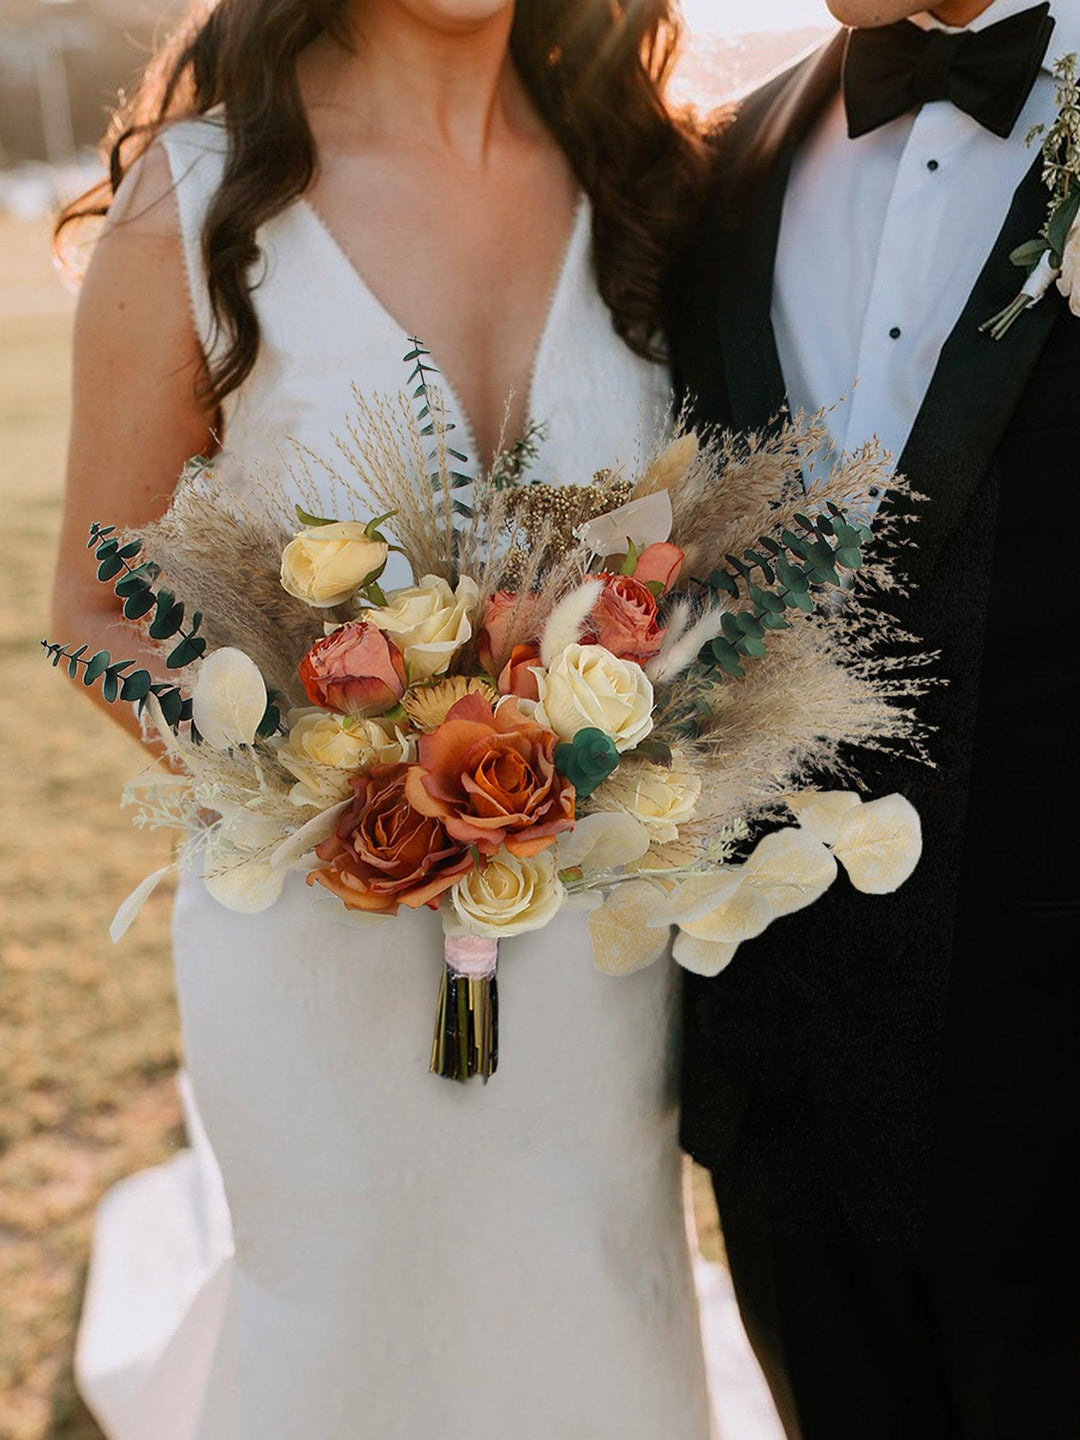 Why Are Dried Flowers Gaining Popularity in Weddings? - Rinlong Flower